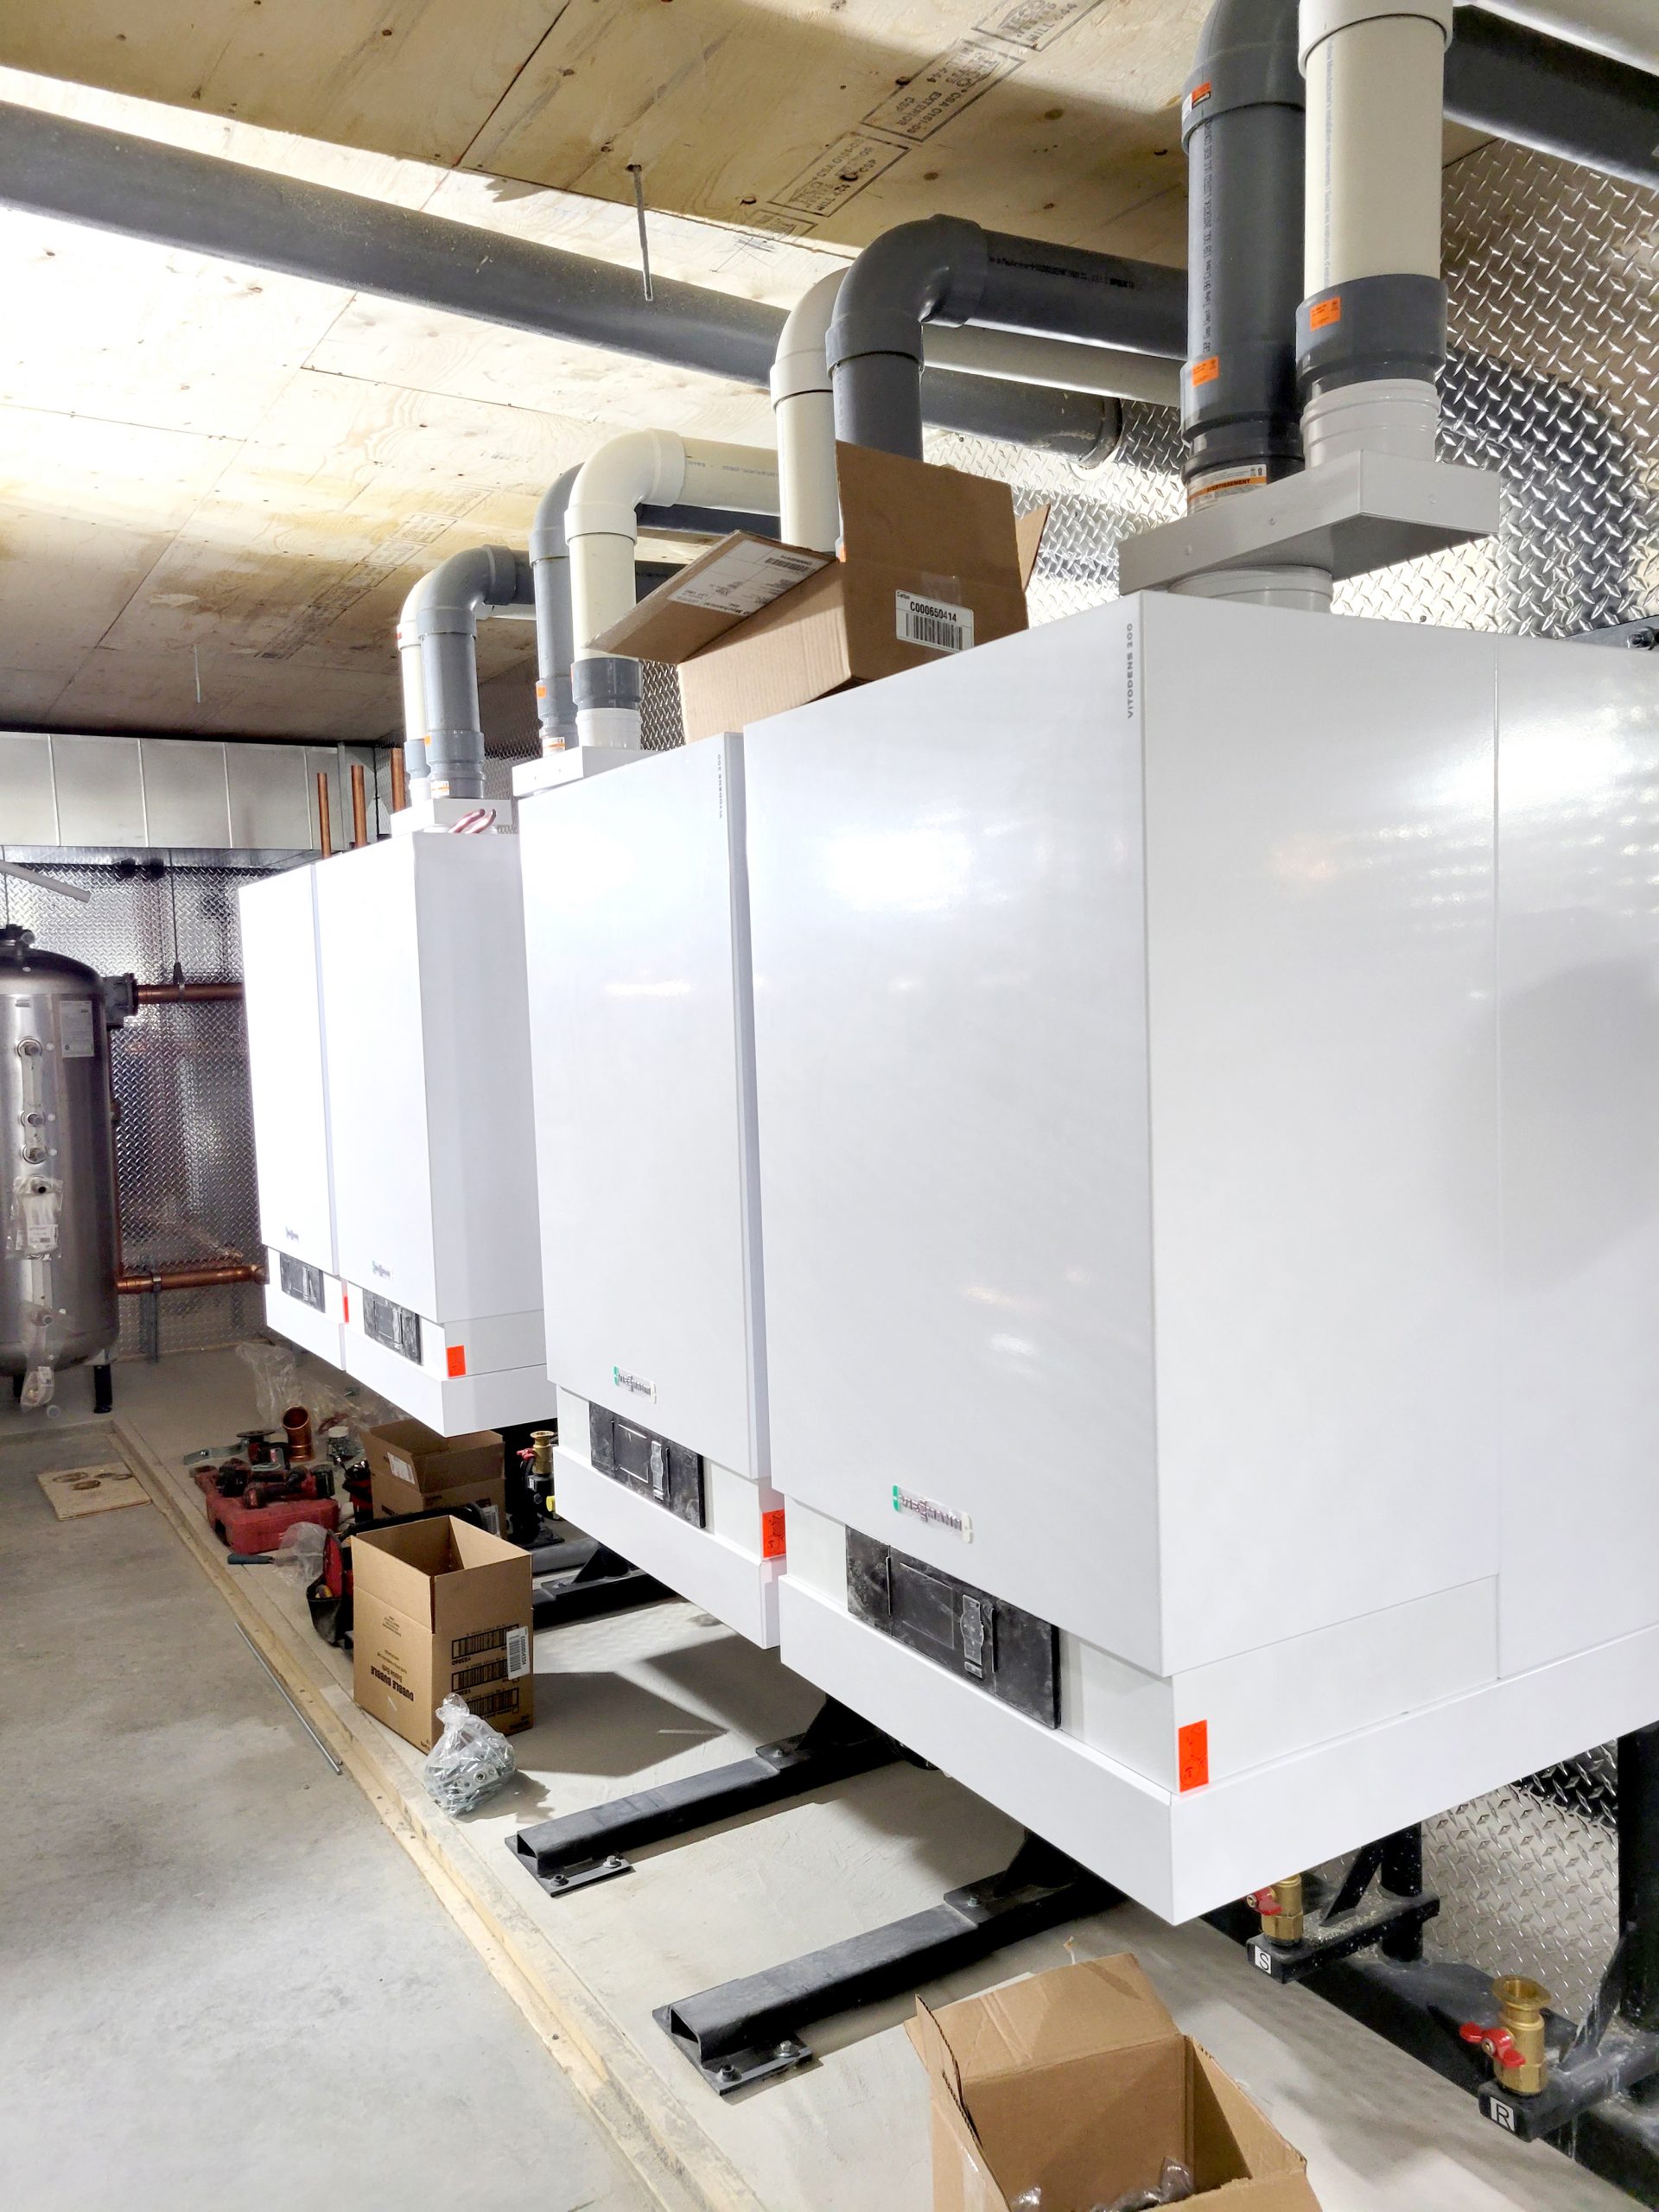 Radiant Heating Systems - boilers and control